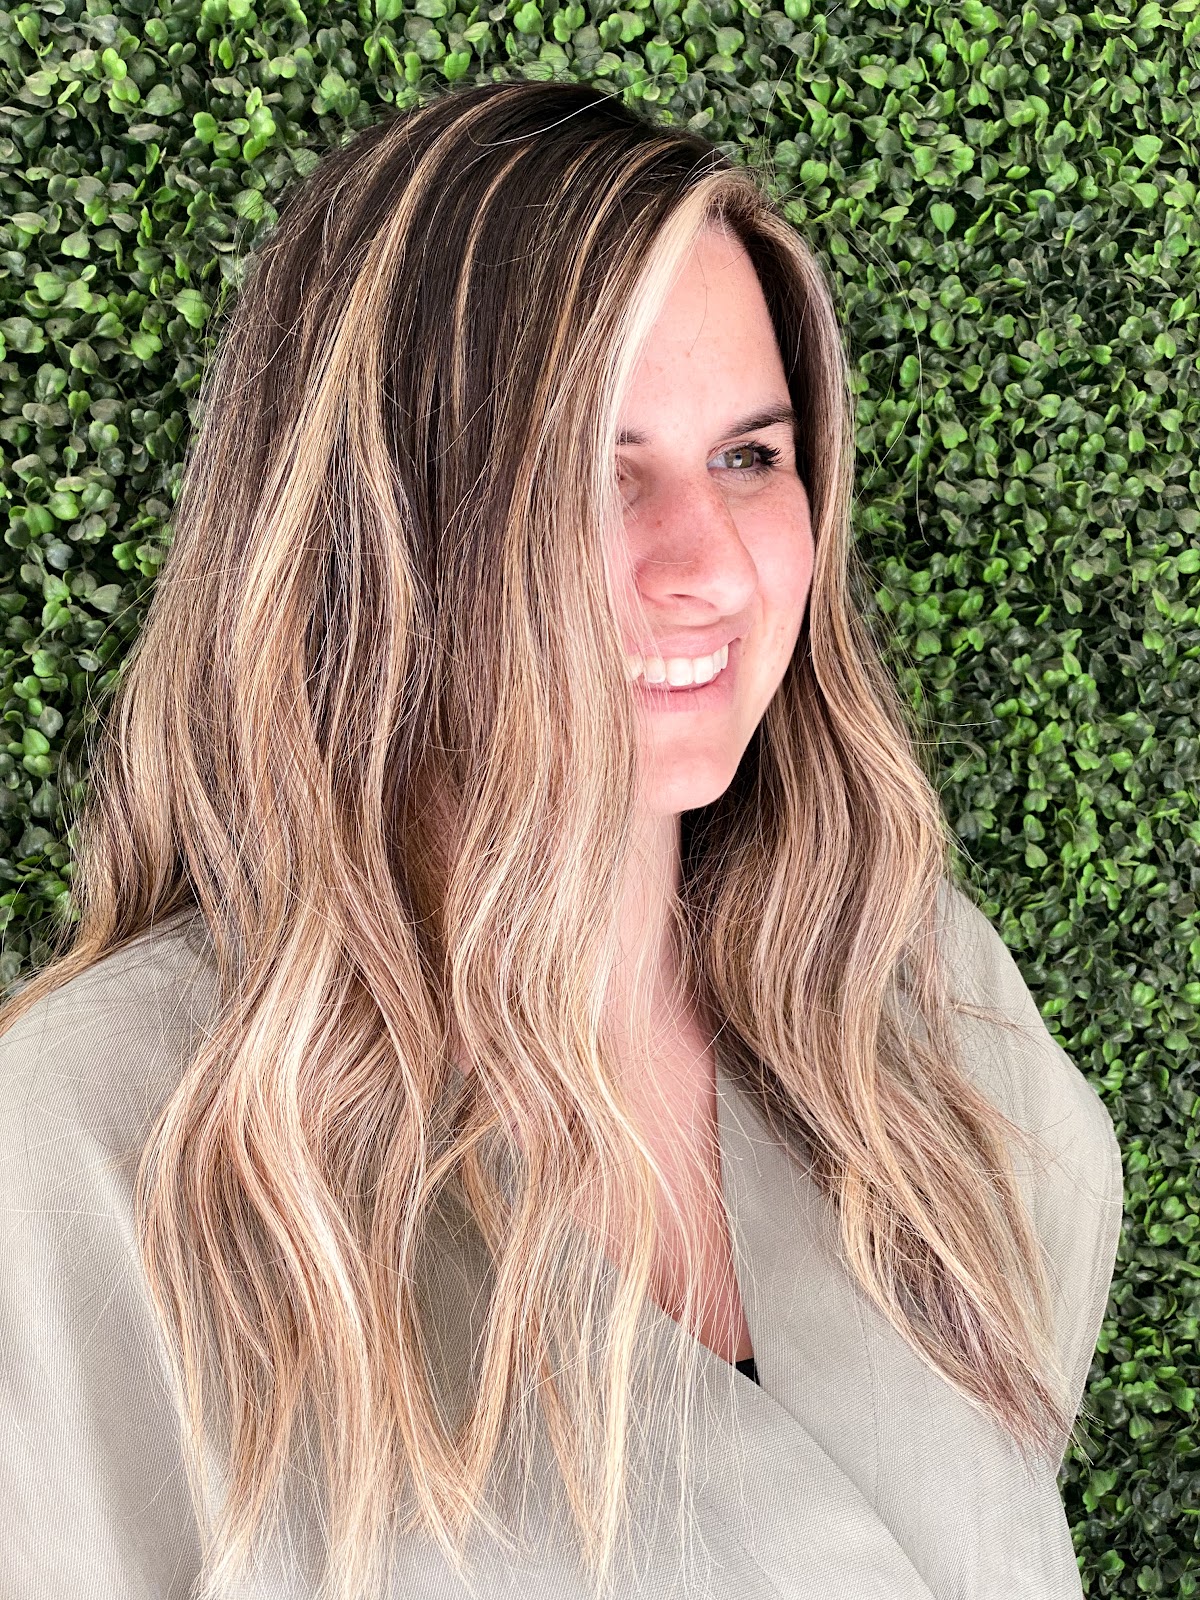 5 Rules to Safely Go from Brunette to Blonde Hair Color